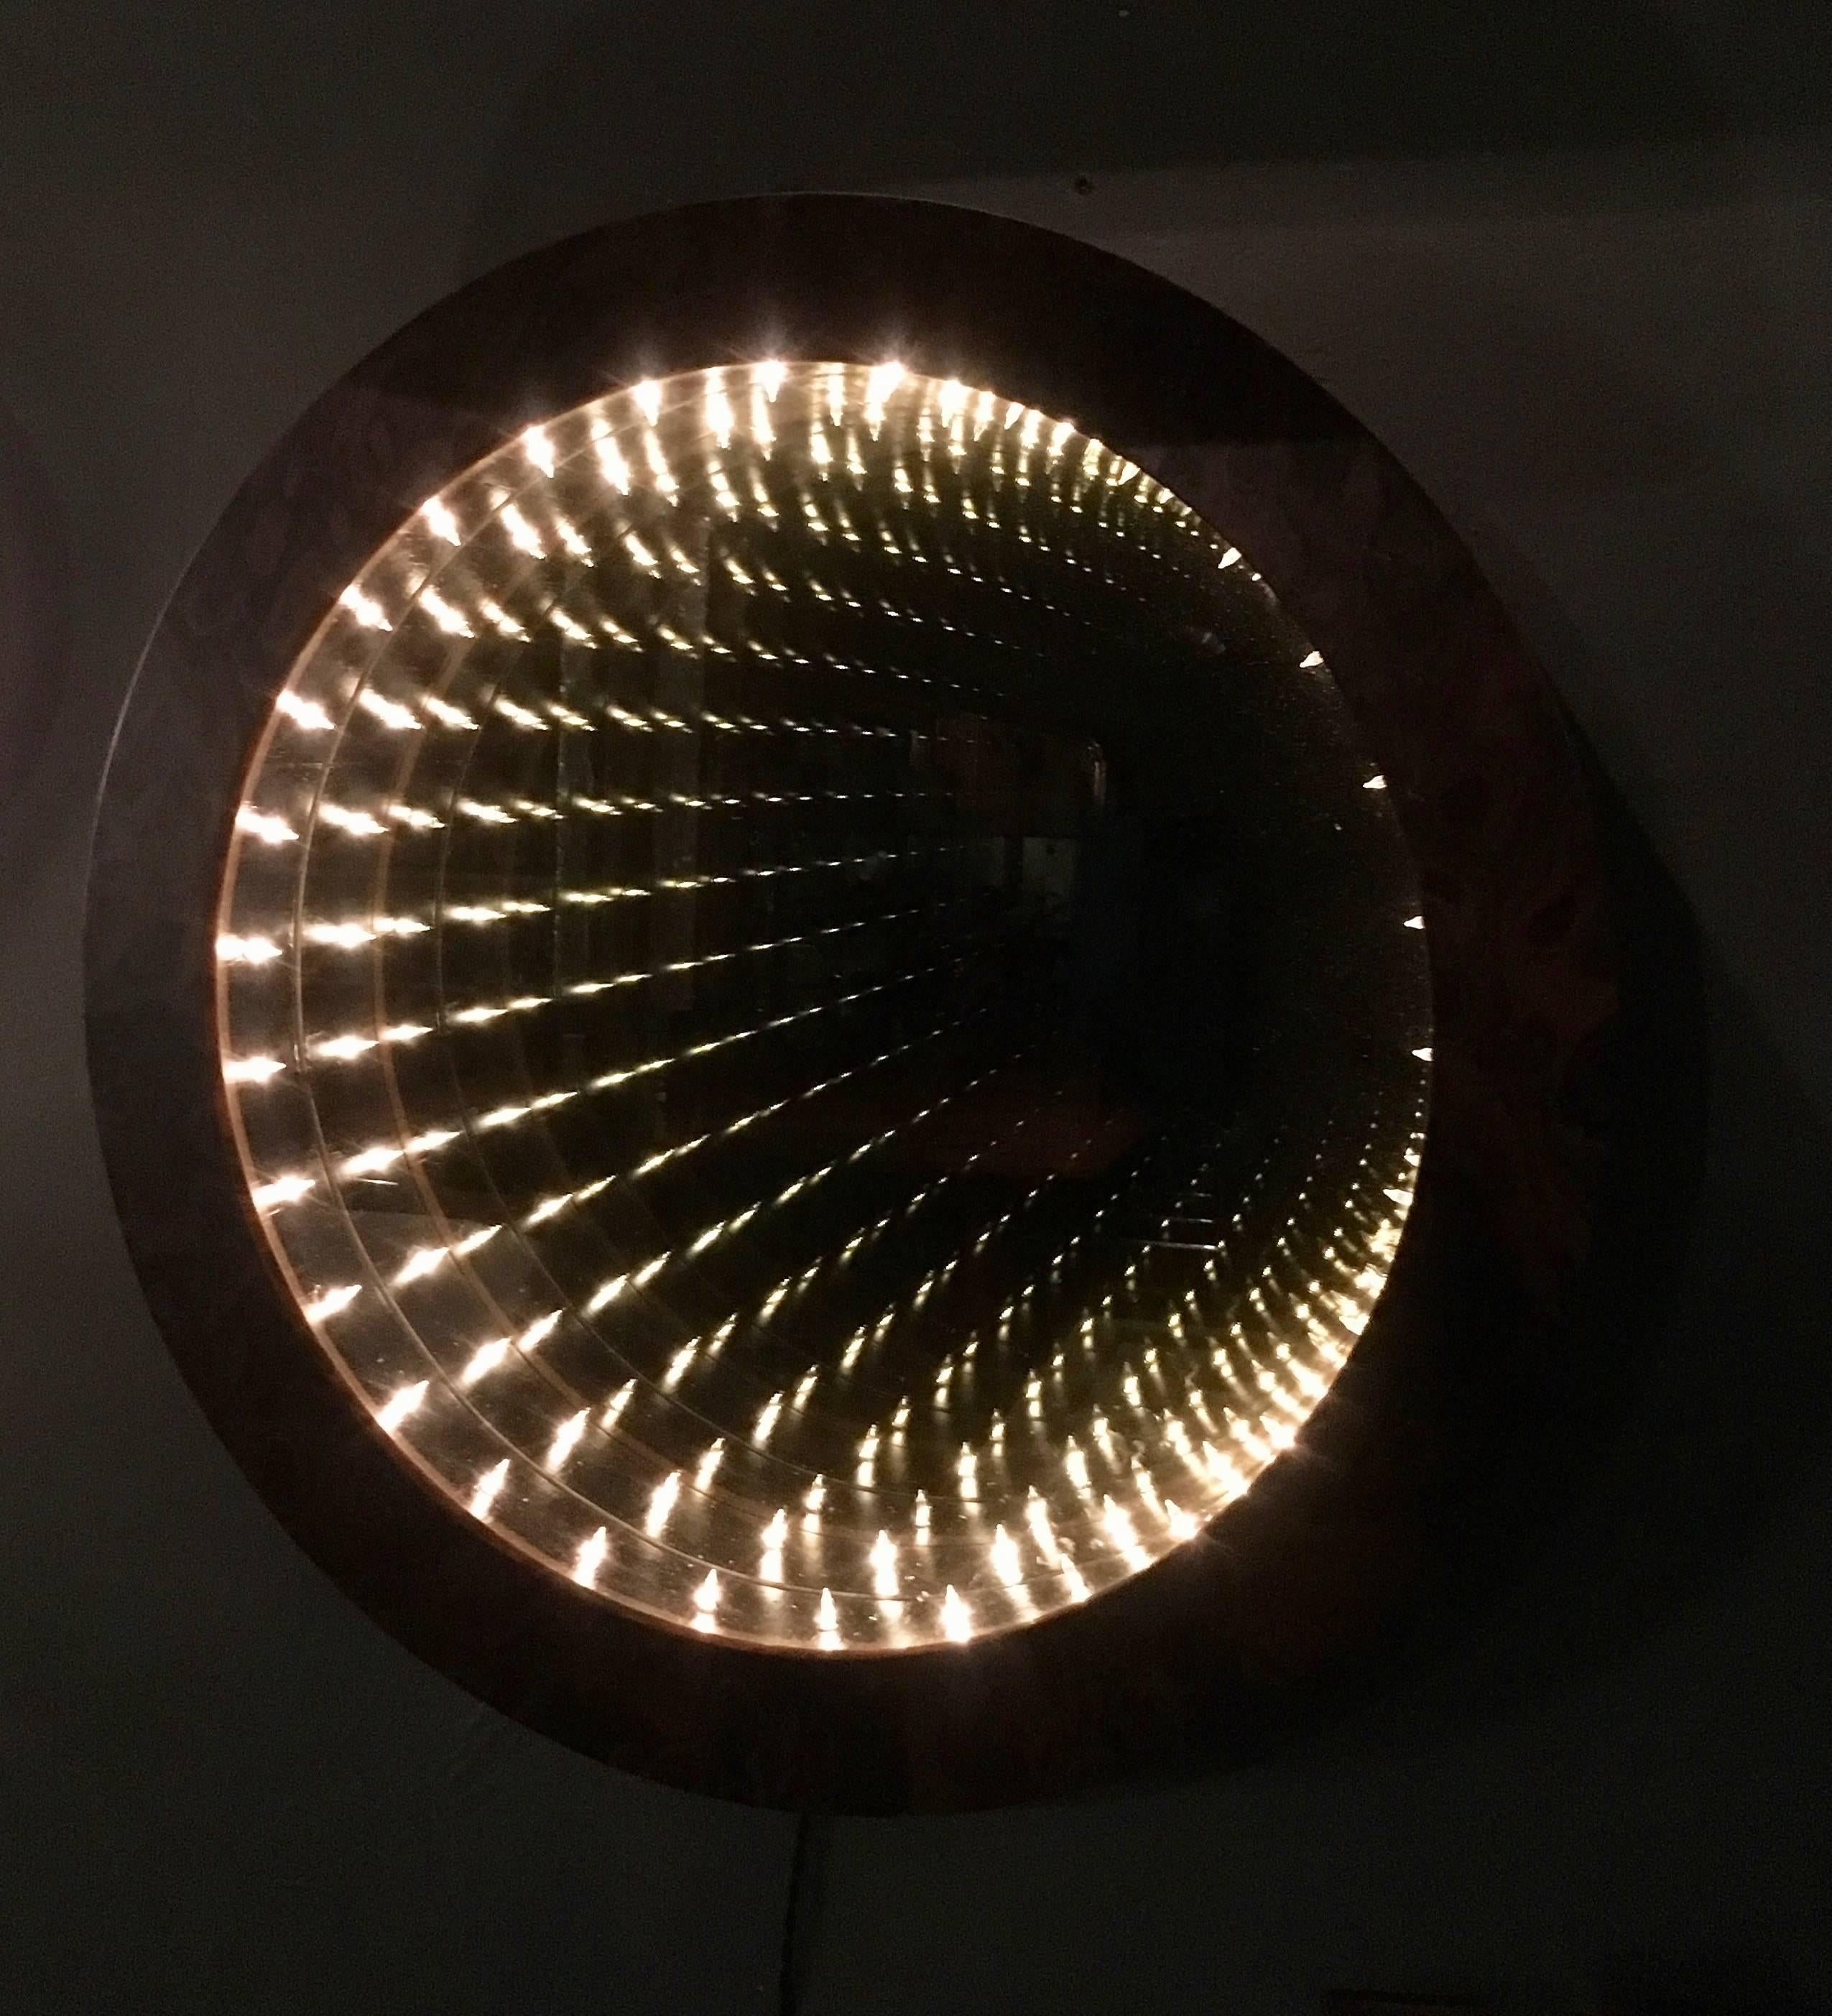 Stunning circular infinity mirror by Merit. Burl wood frame mirror looks great off as well as an ambient light and piece of art while illuminated. 

Custom sizes and finishes available.